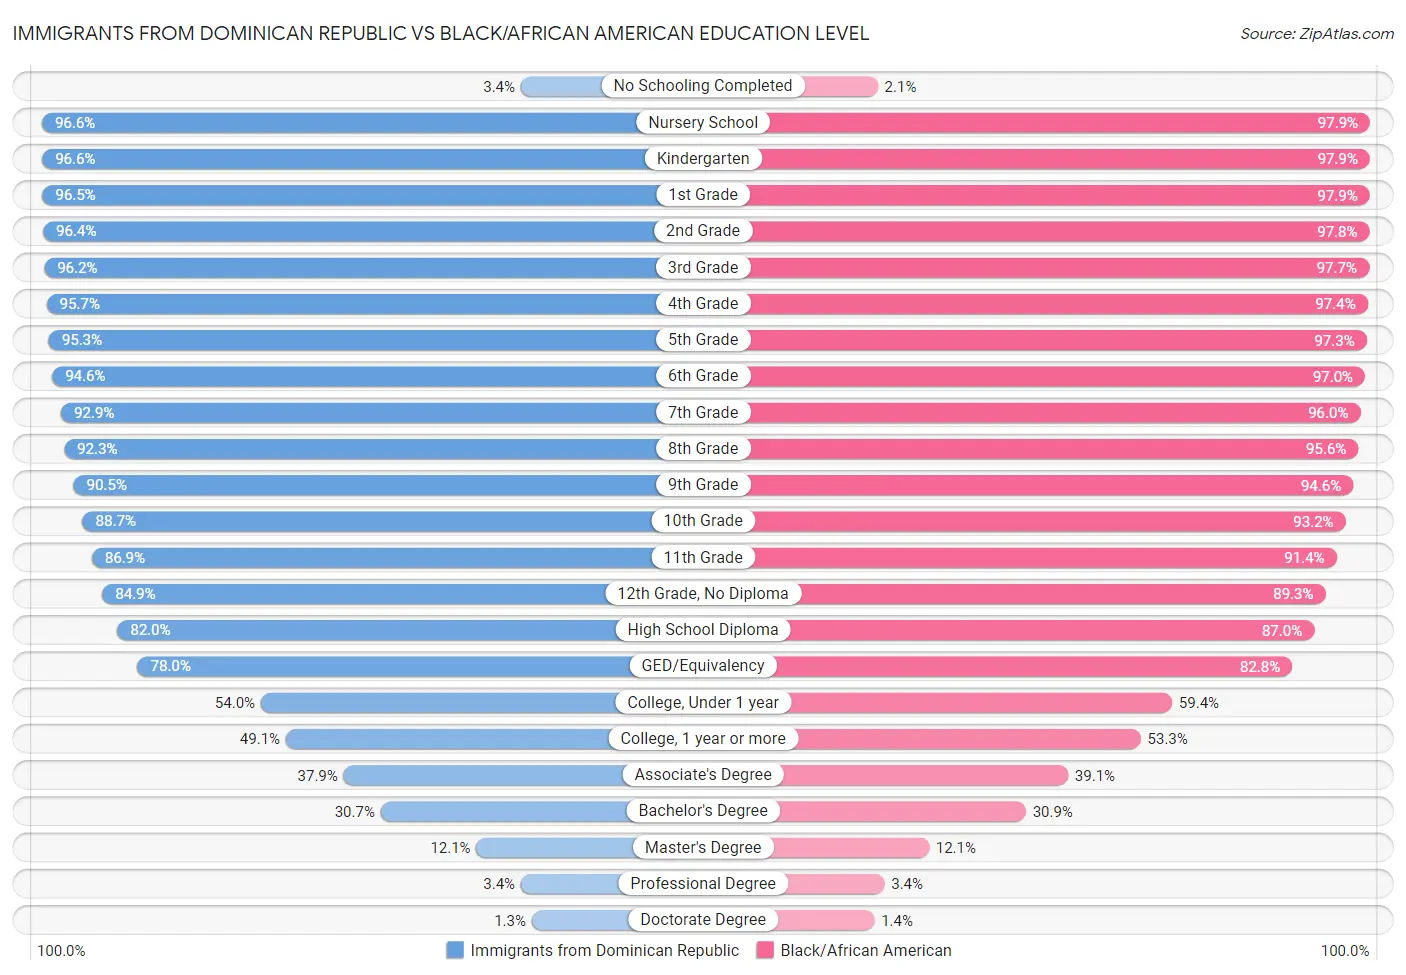 Immigrants from Dominican Republic vs Black/African American Education Level